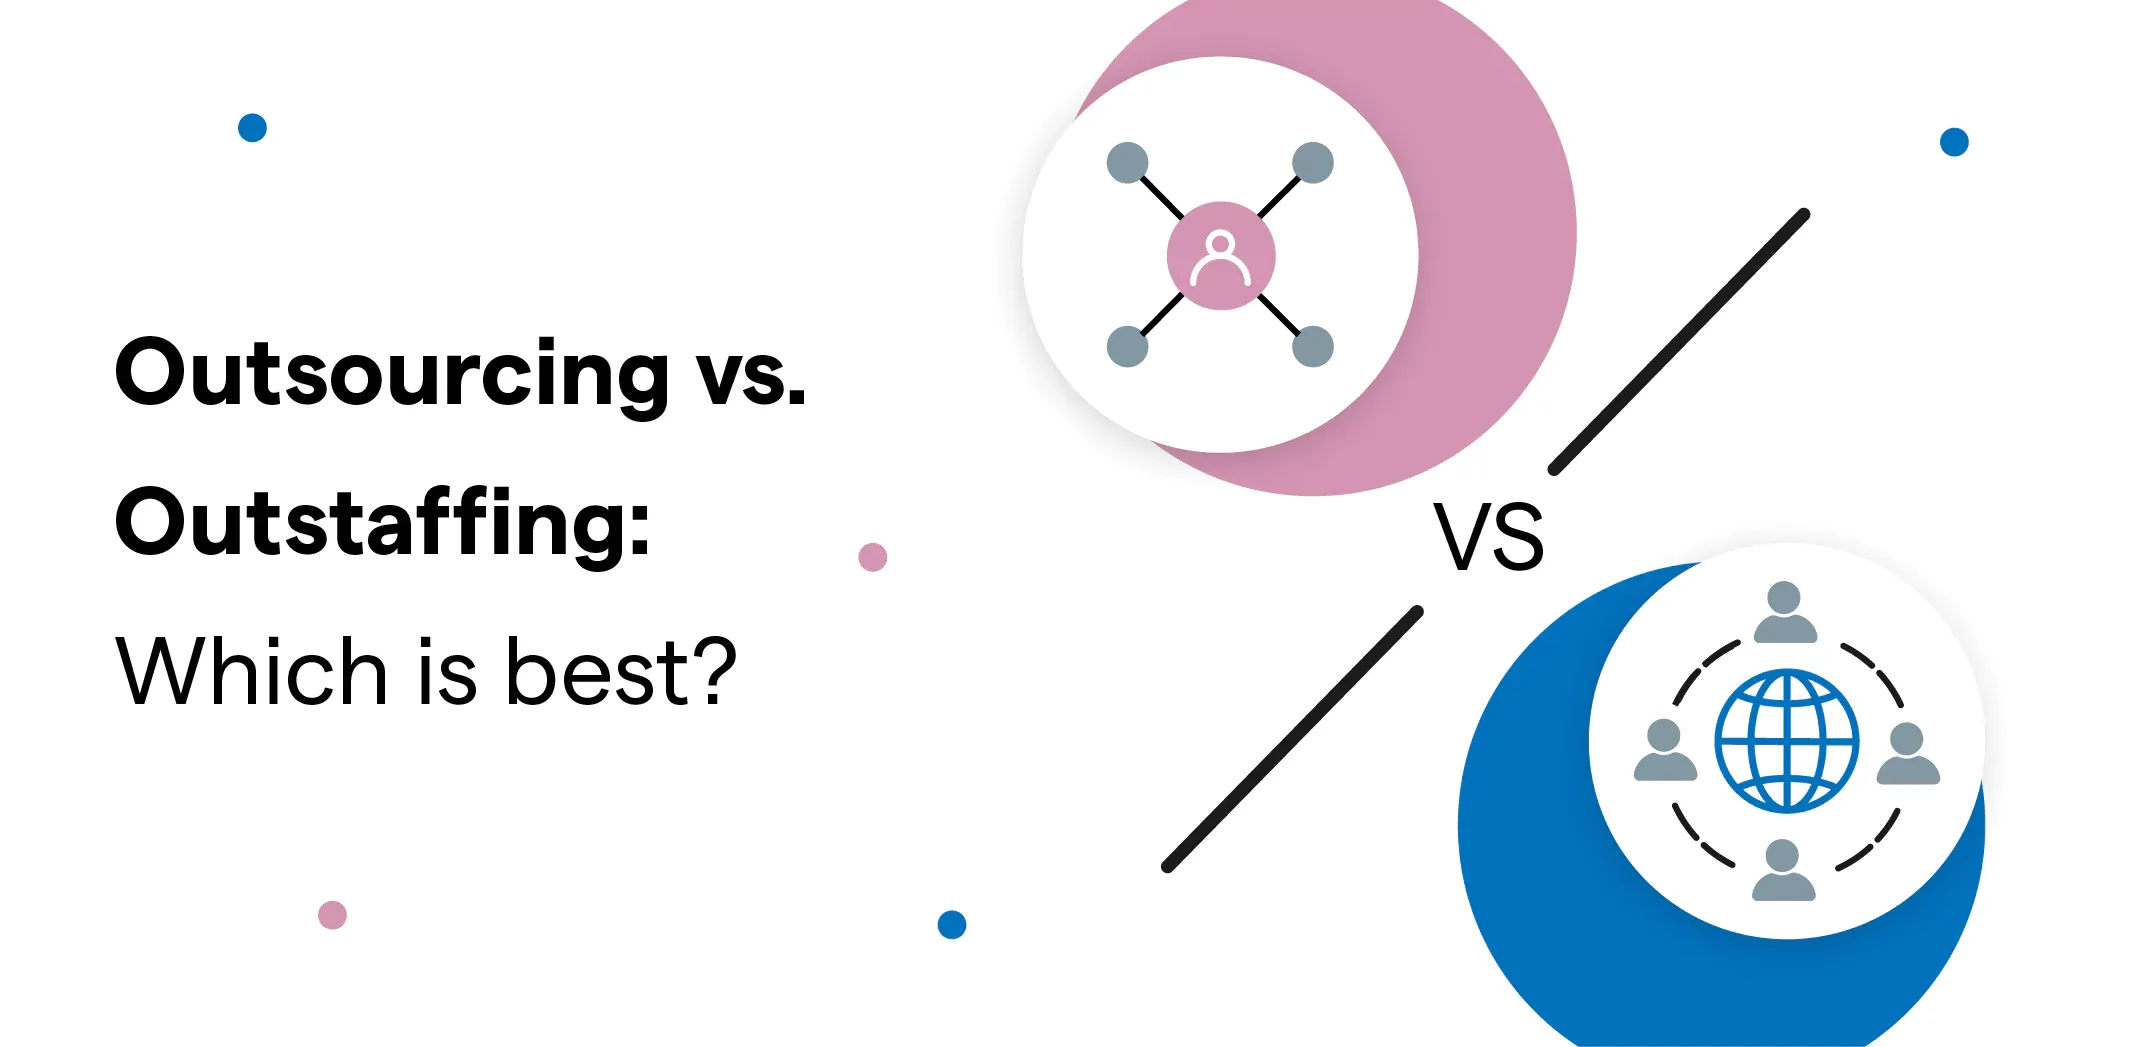 Outsourcing vs. Outstaffing: Which is best?